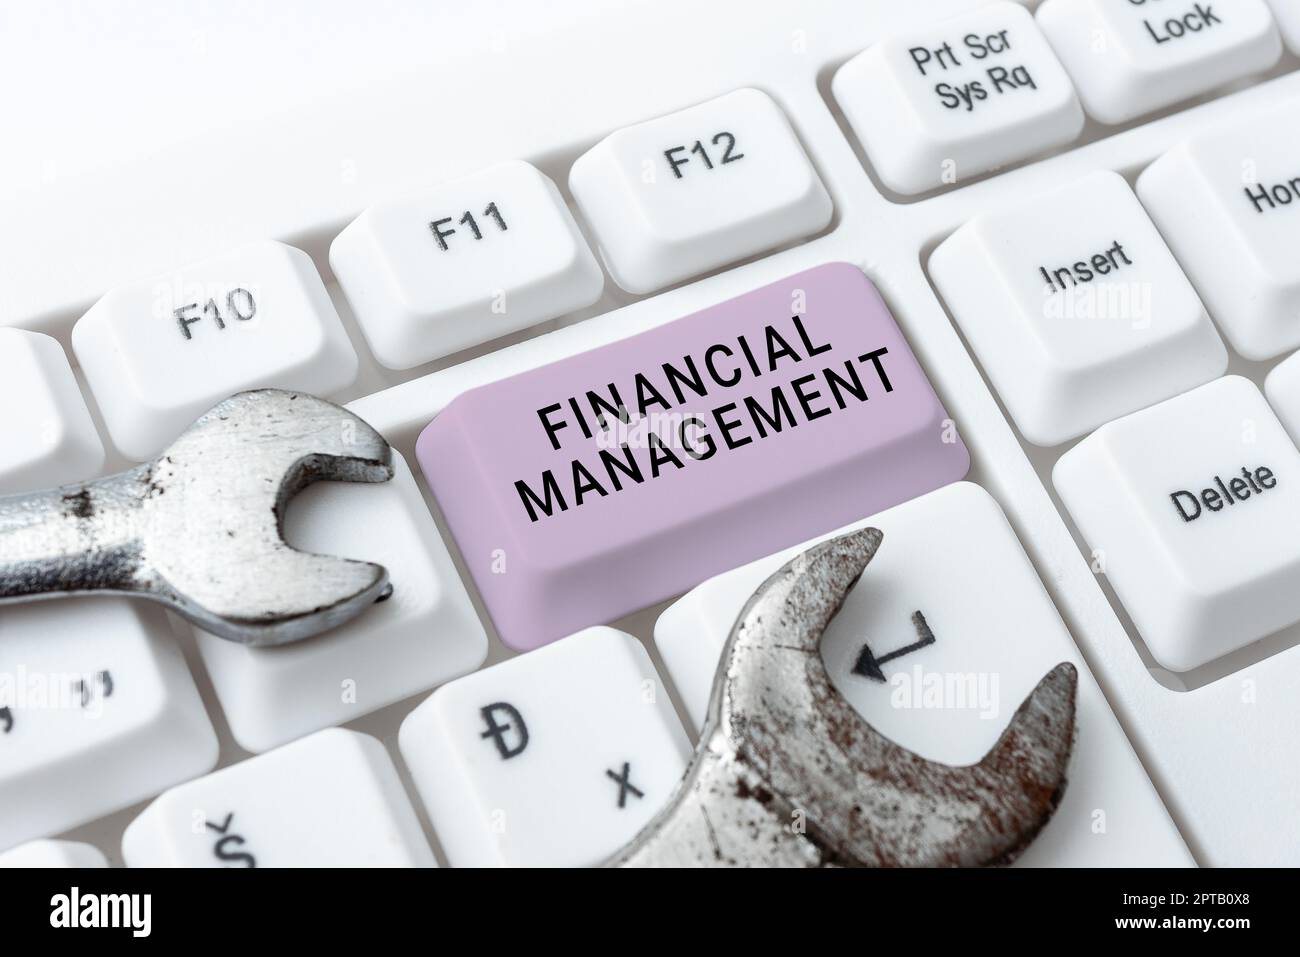 Text showing inspiration Financial Management, Business approach efficient and effective way to Manage Money and Funds Stock Photo